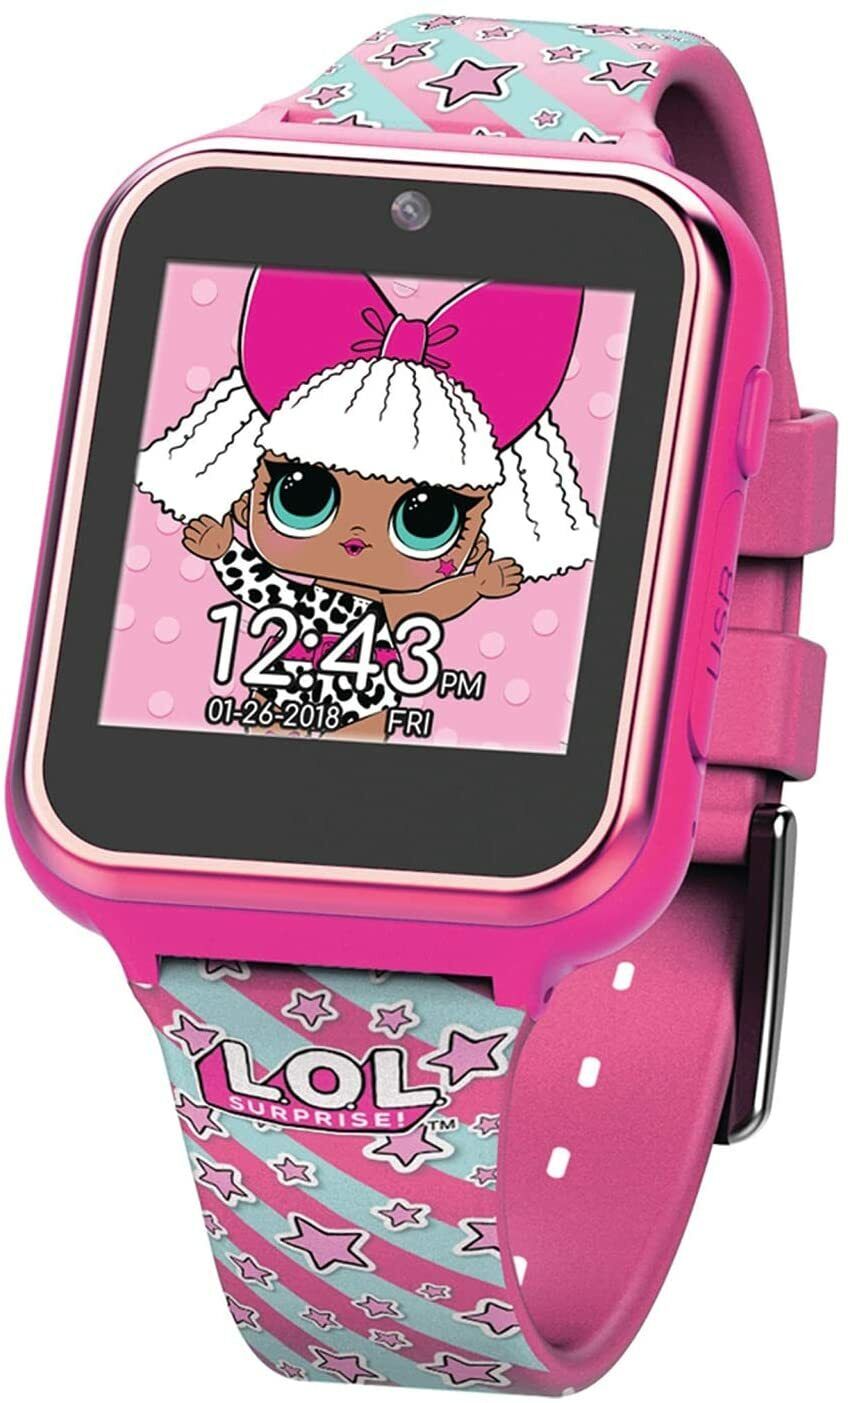 Lol Surprise Interactive Touch Screen Watch 